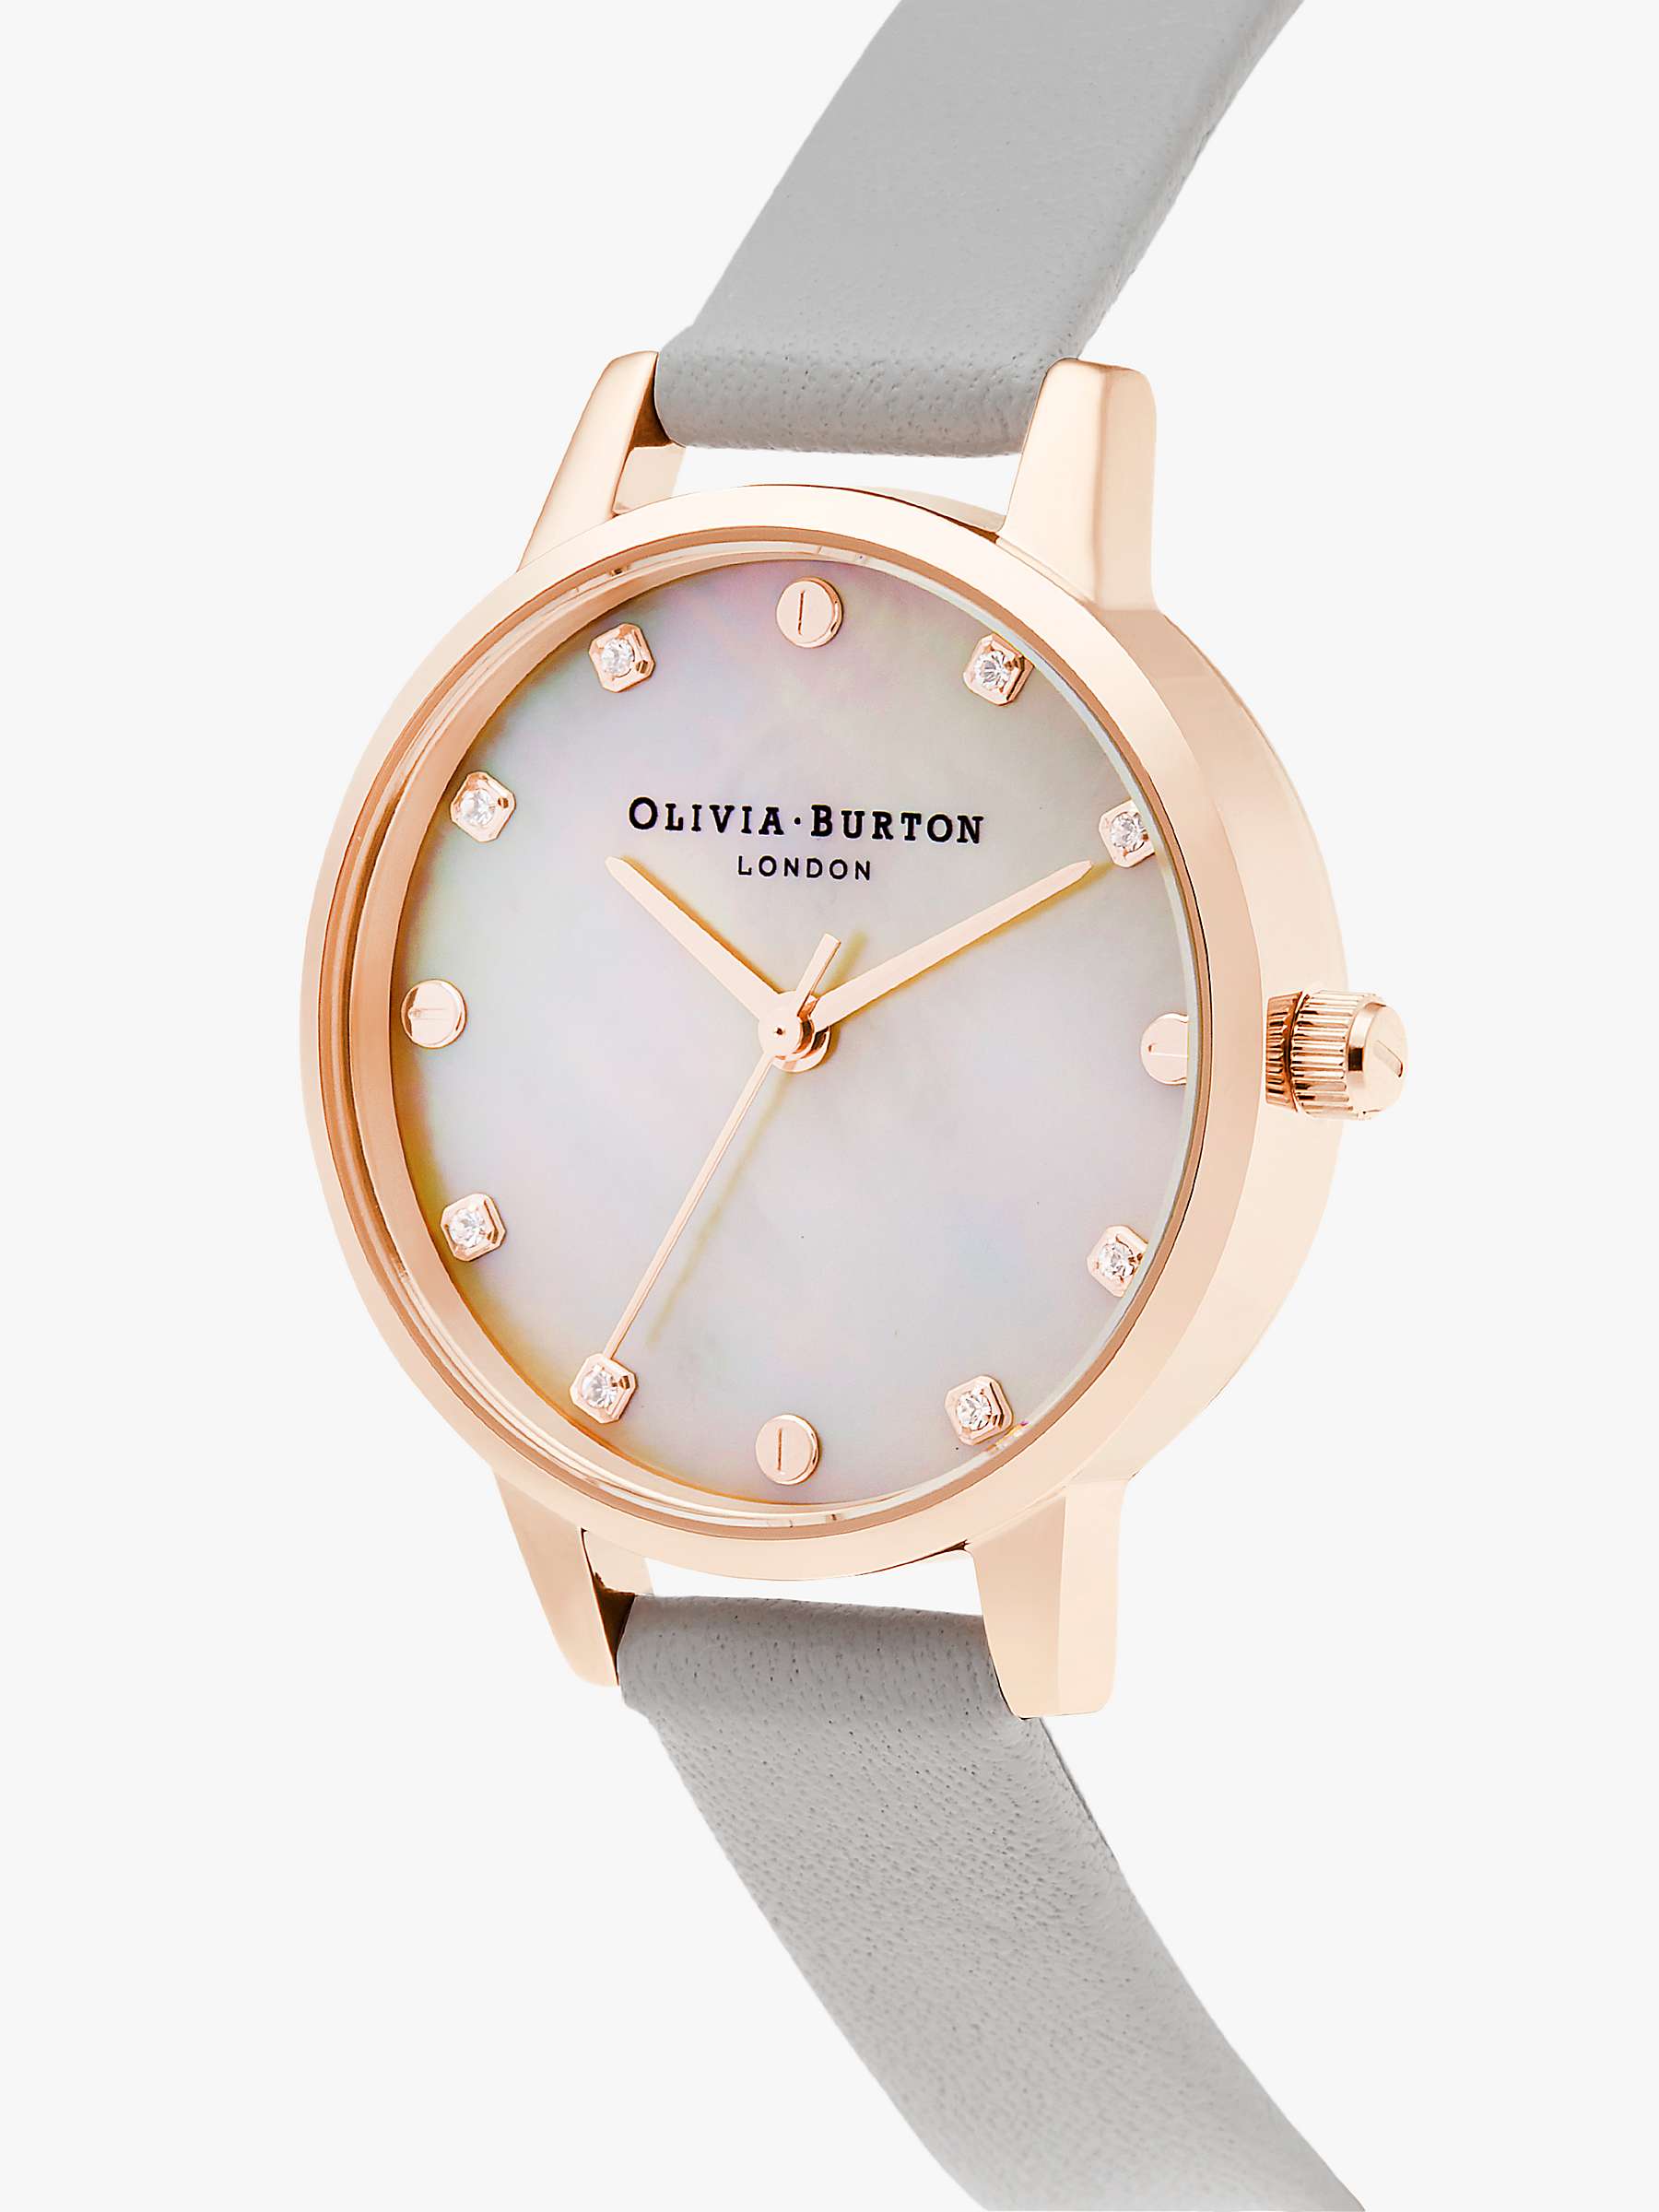 Buy Olivia Burton OB16SE12 Women's Classic Leather Strap Watch, Grey/Mother of Pearl Online at johnlewis.com